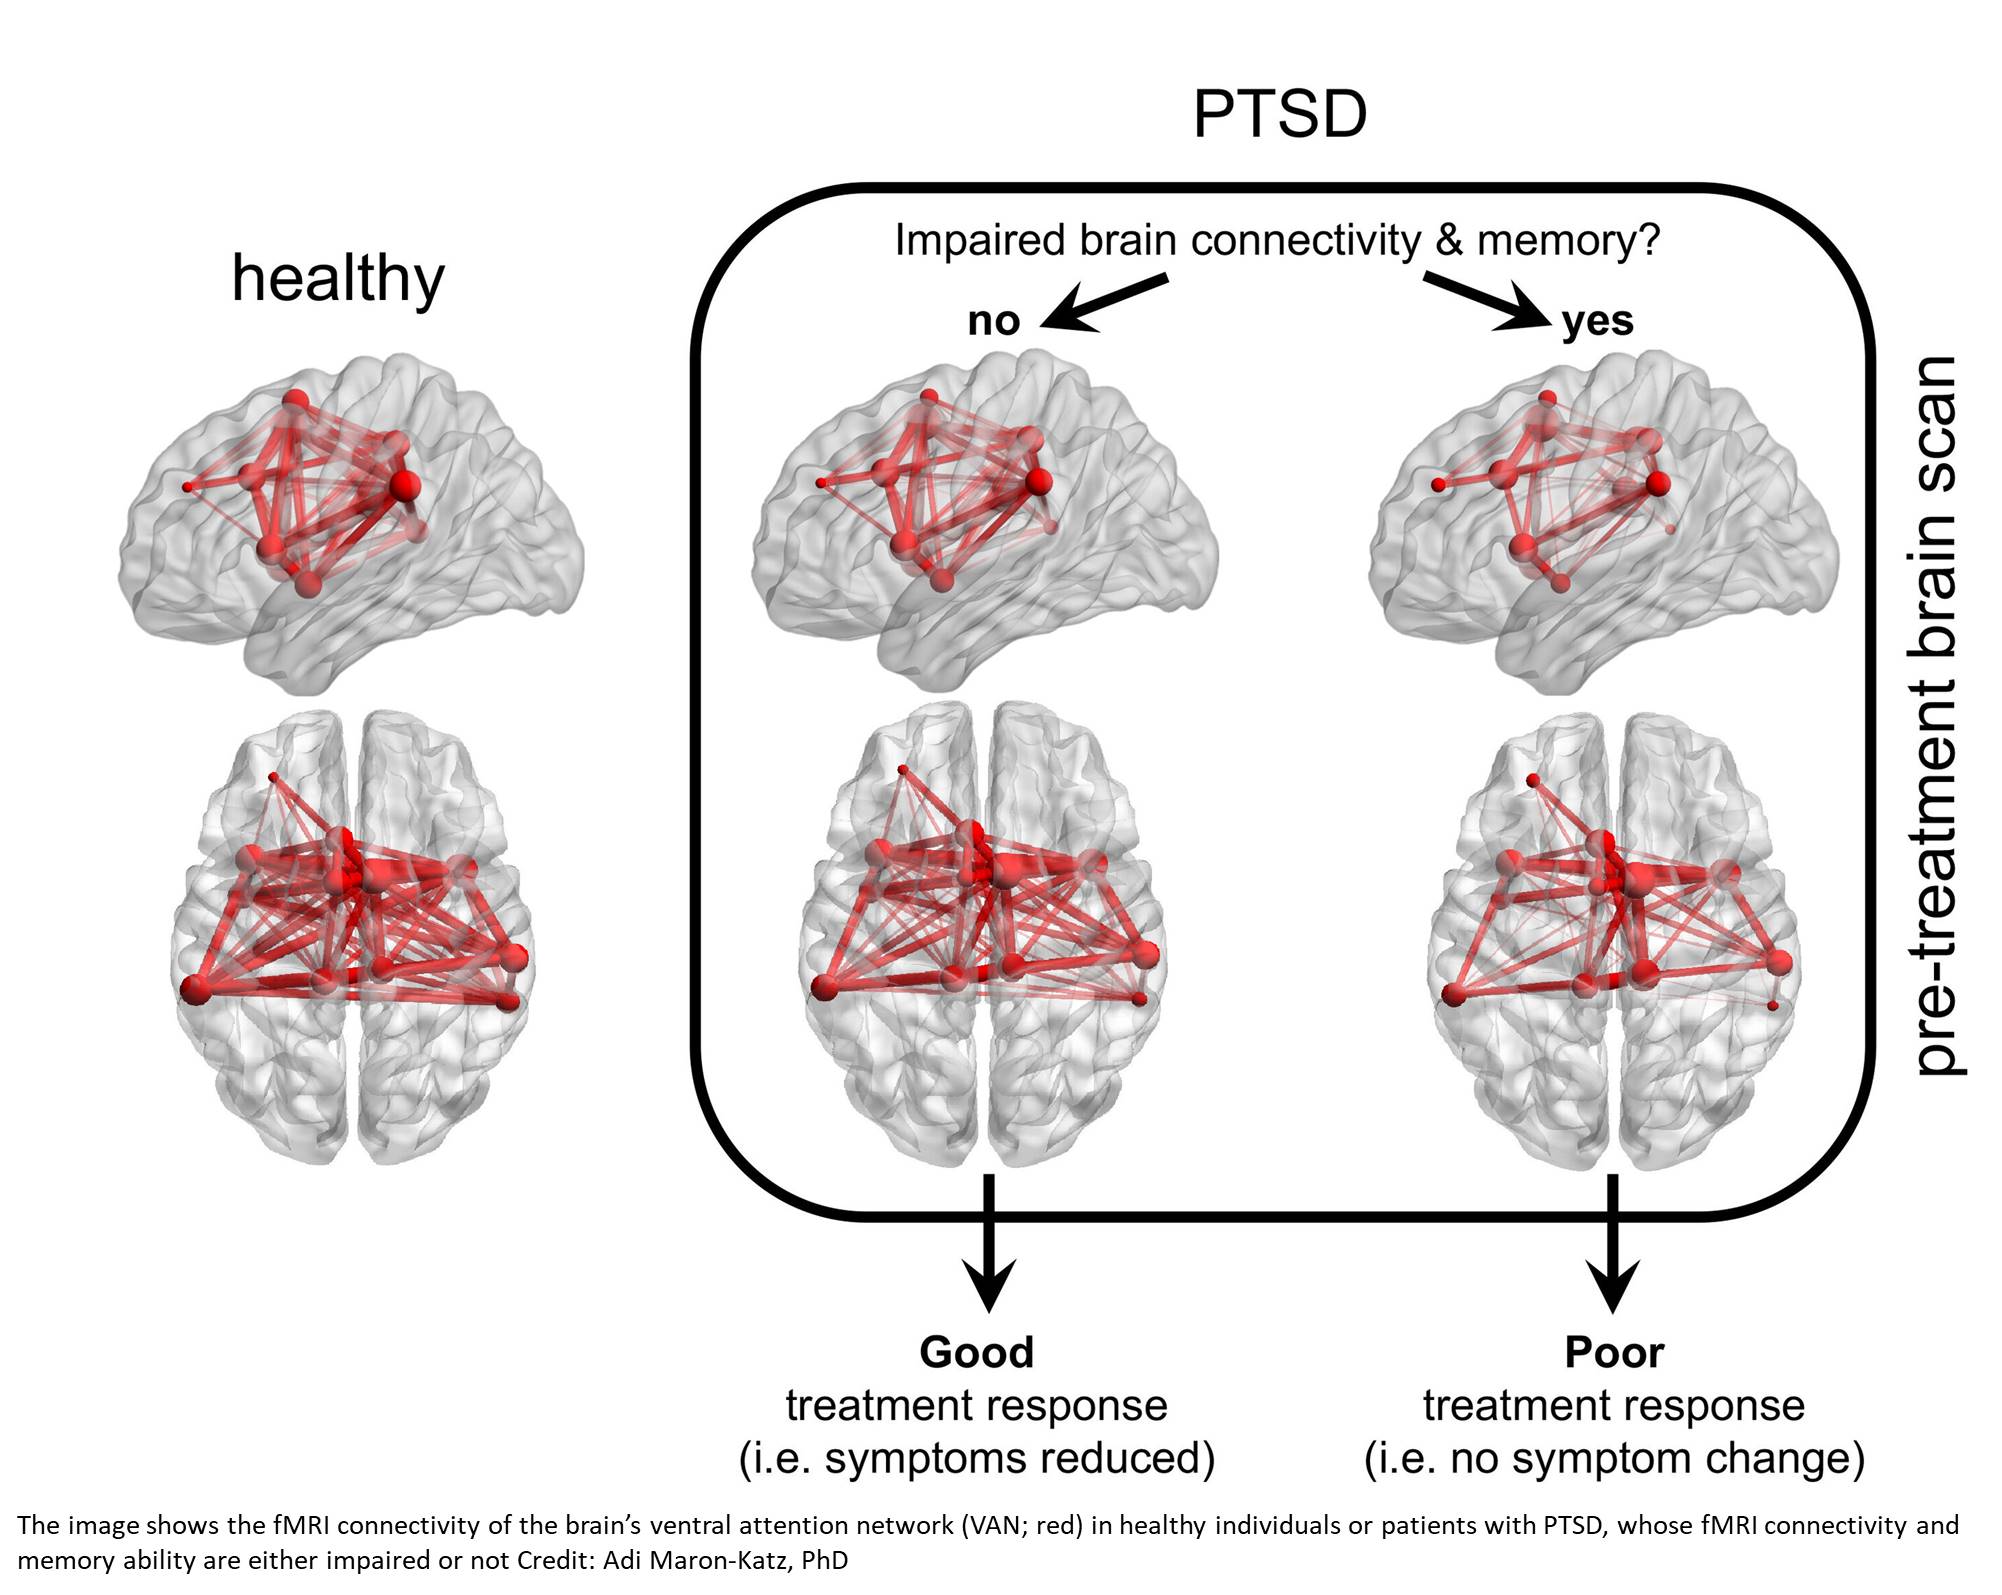 Why certain PTSD patients unresponsive to behavioral therapy